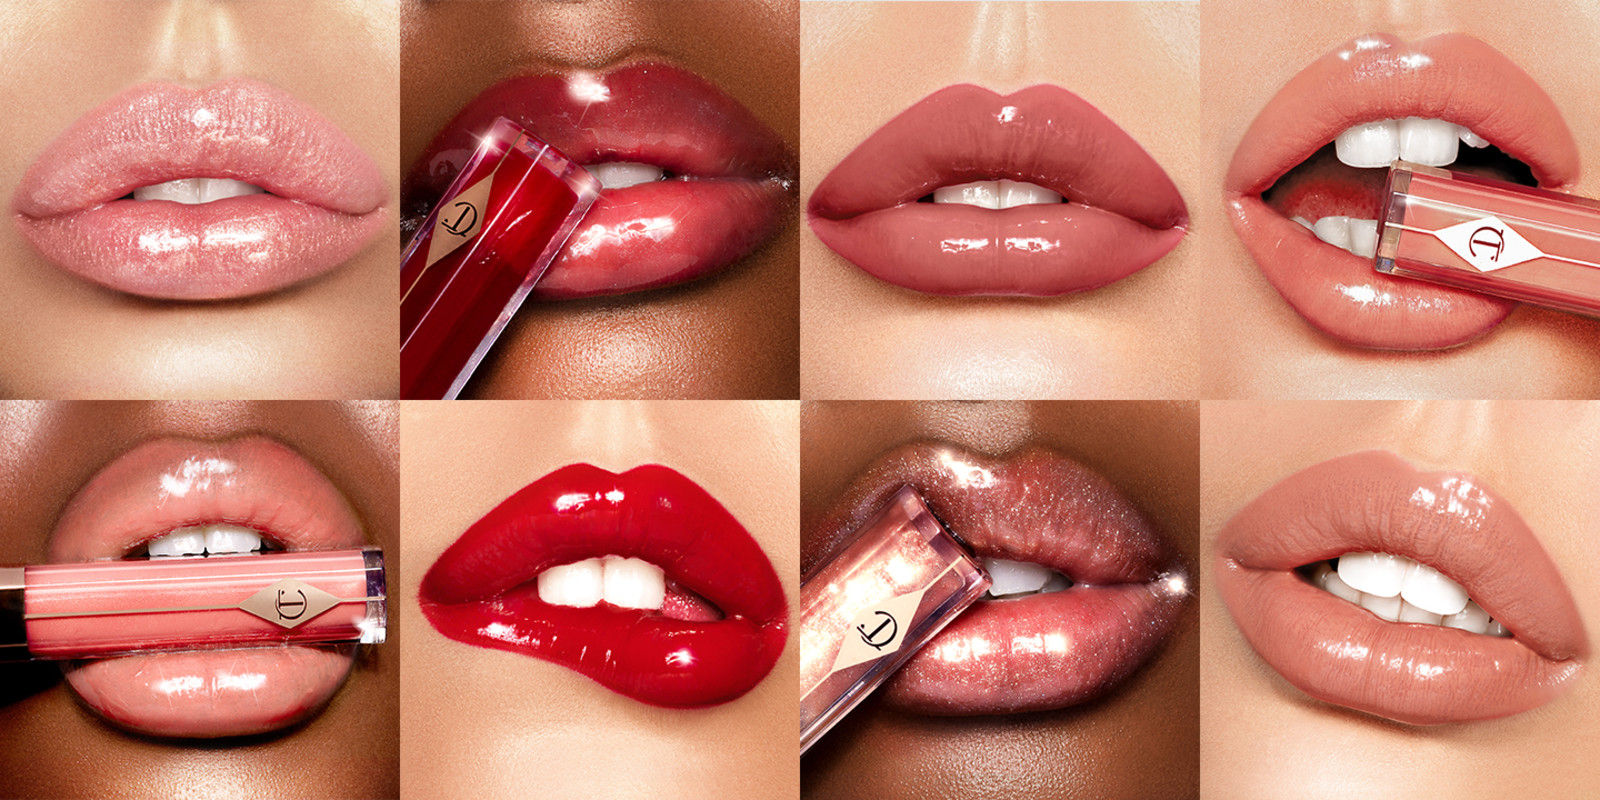 From Matte To Glossy: The Ultimate Lip Finish Guide